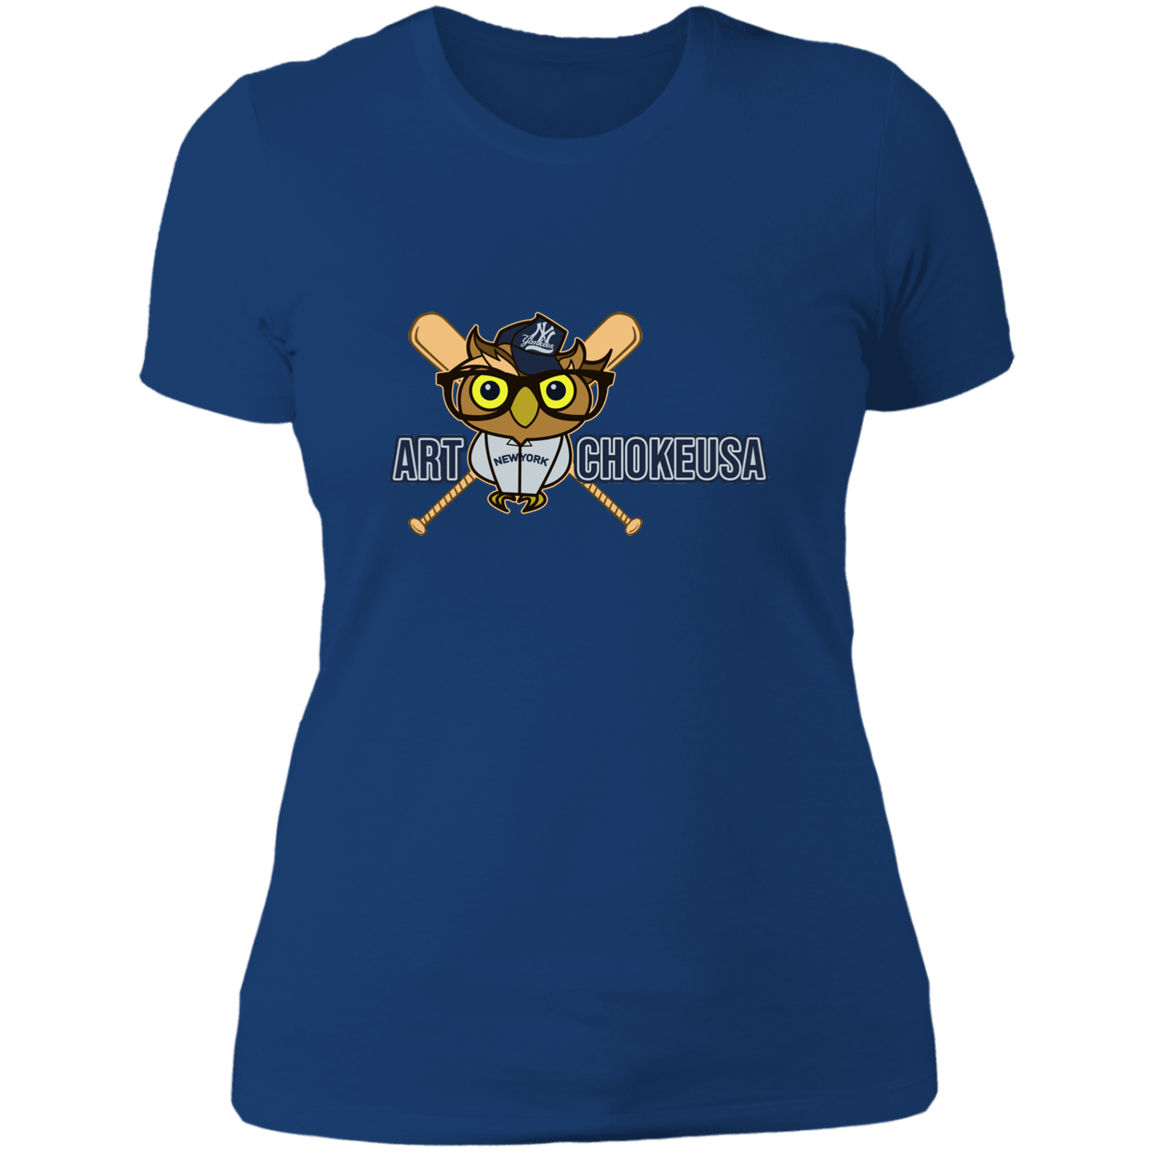 ArtichokeUSA Character and Font design. New York Owl. NY Yankees Fan Art. Let's Create Your Own Team Design Today. Ladies' Boyfriend T-Shirt